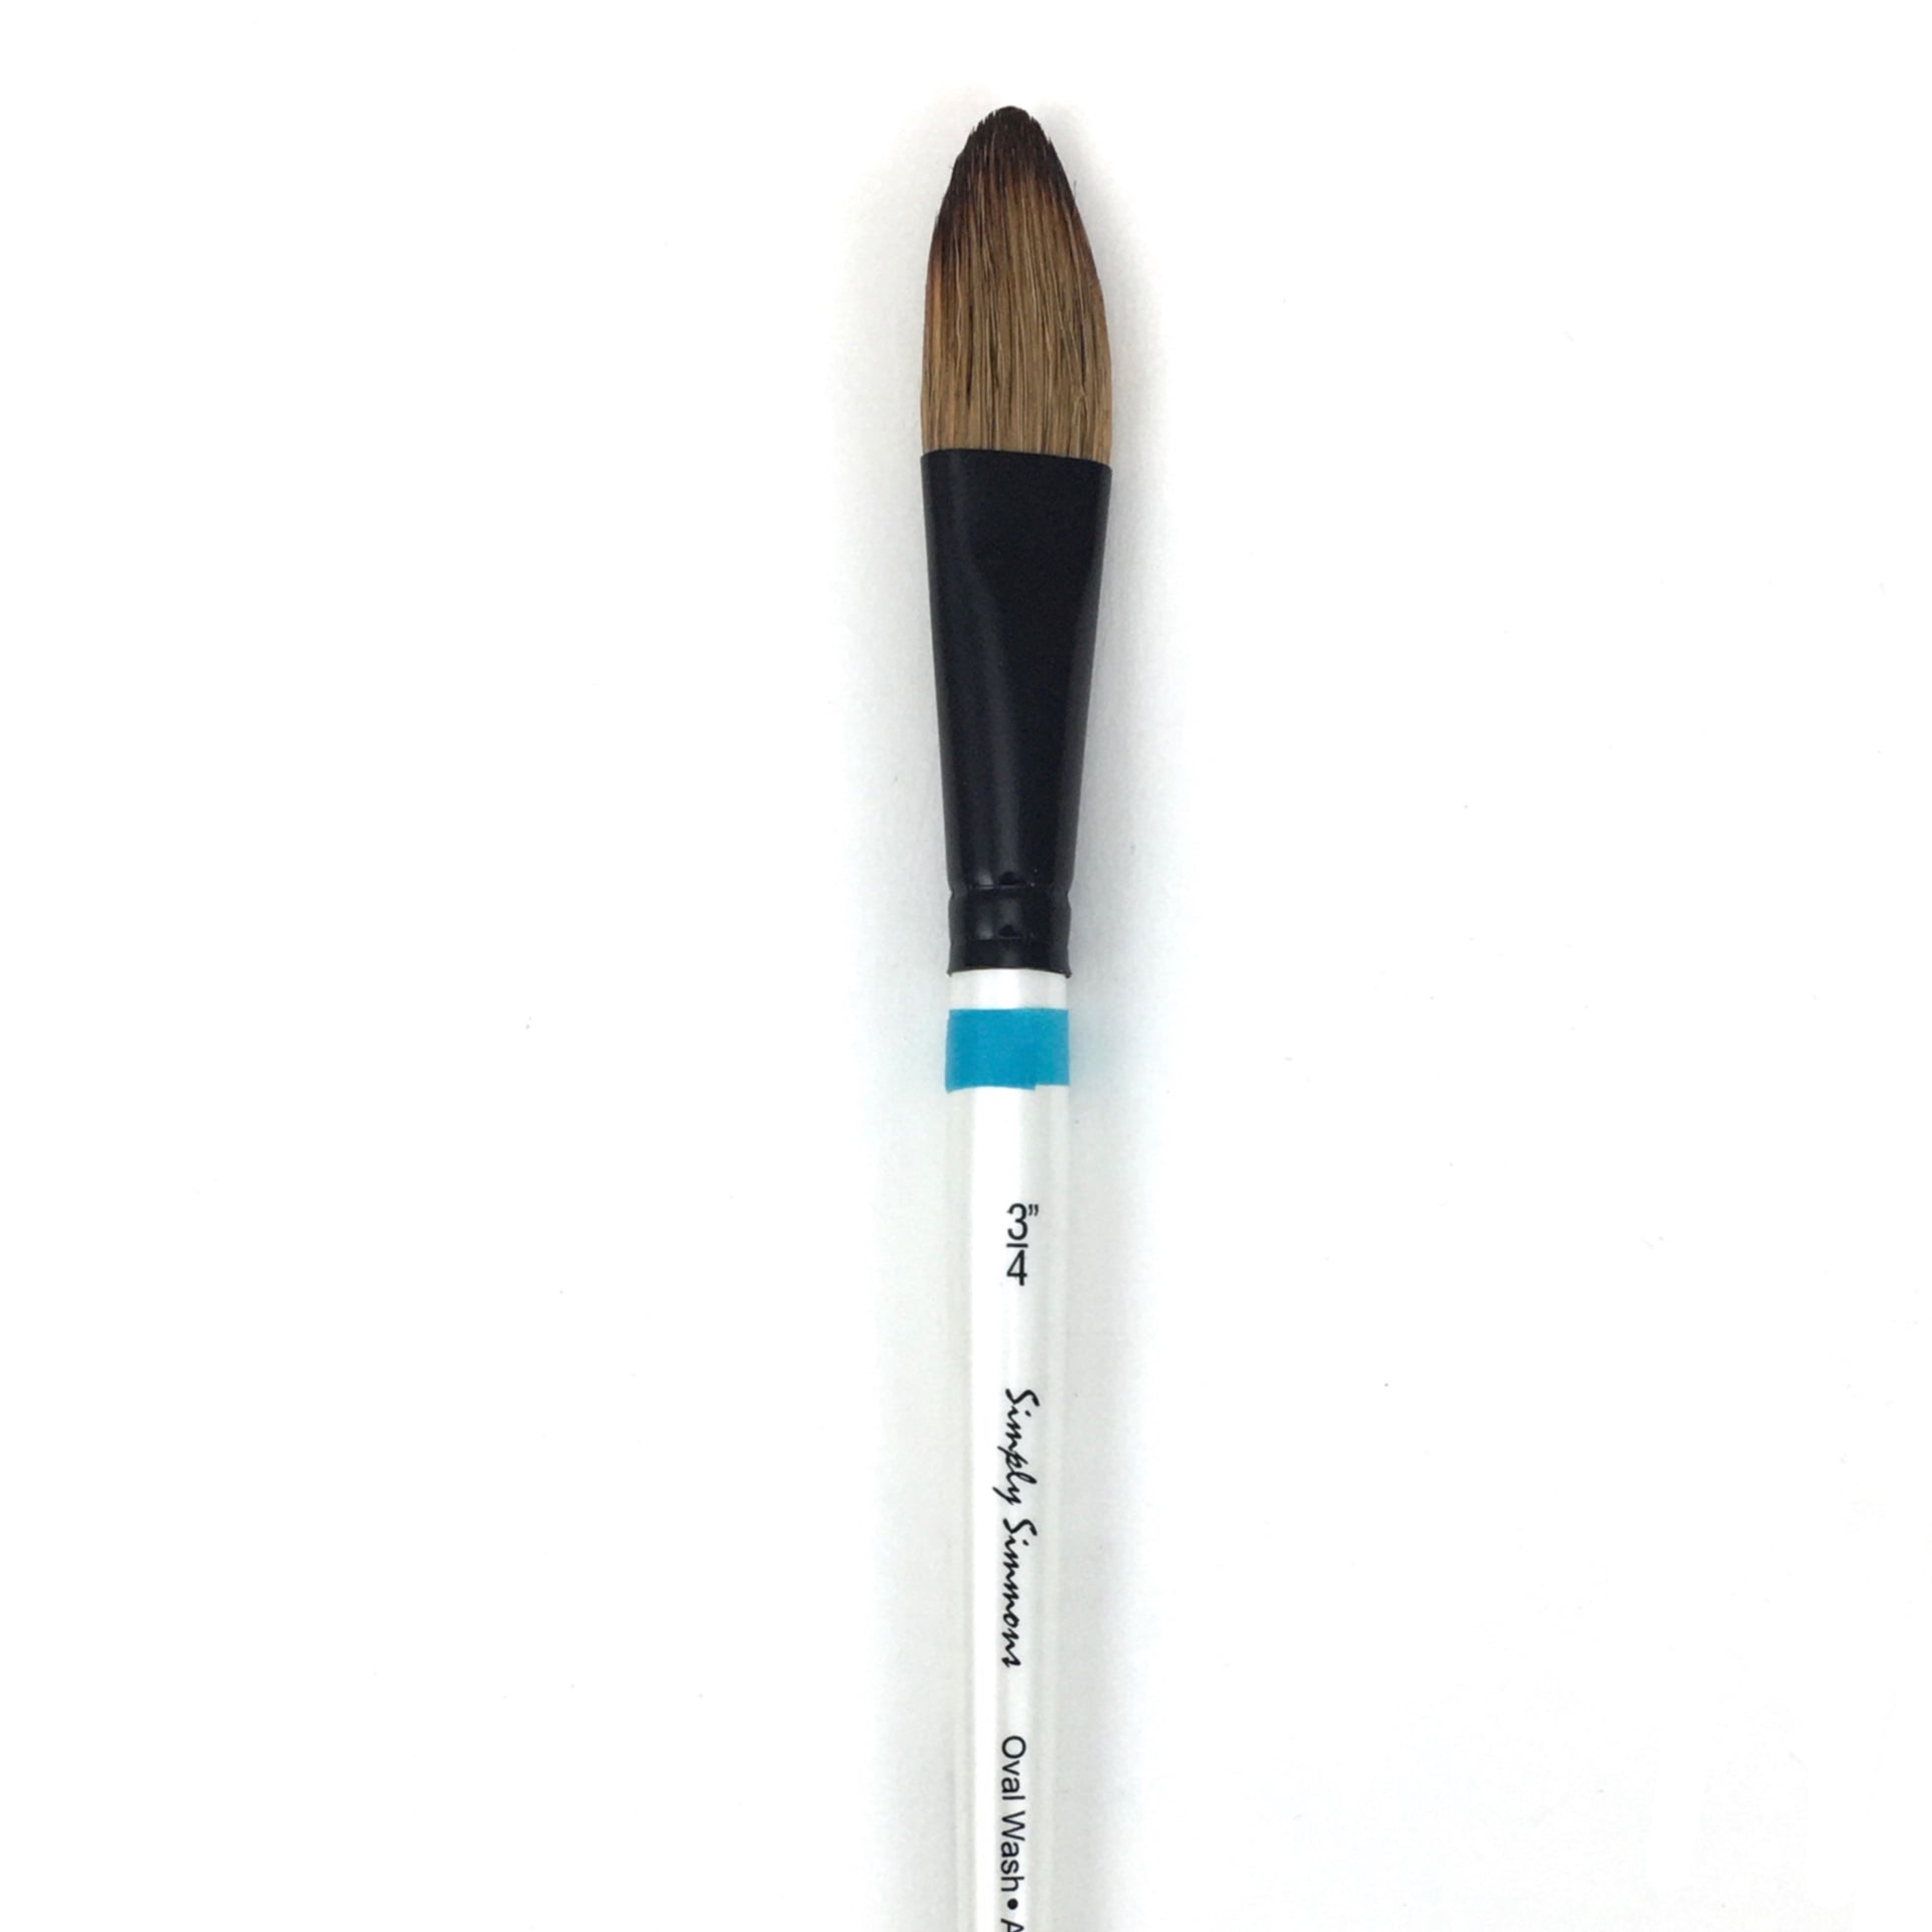 Simply Simmons Watercolor Brush - Short Handle - Oval Wash / - 3/4 inches / - natural by Robert Simmons - K. A. Artist Shop